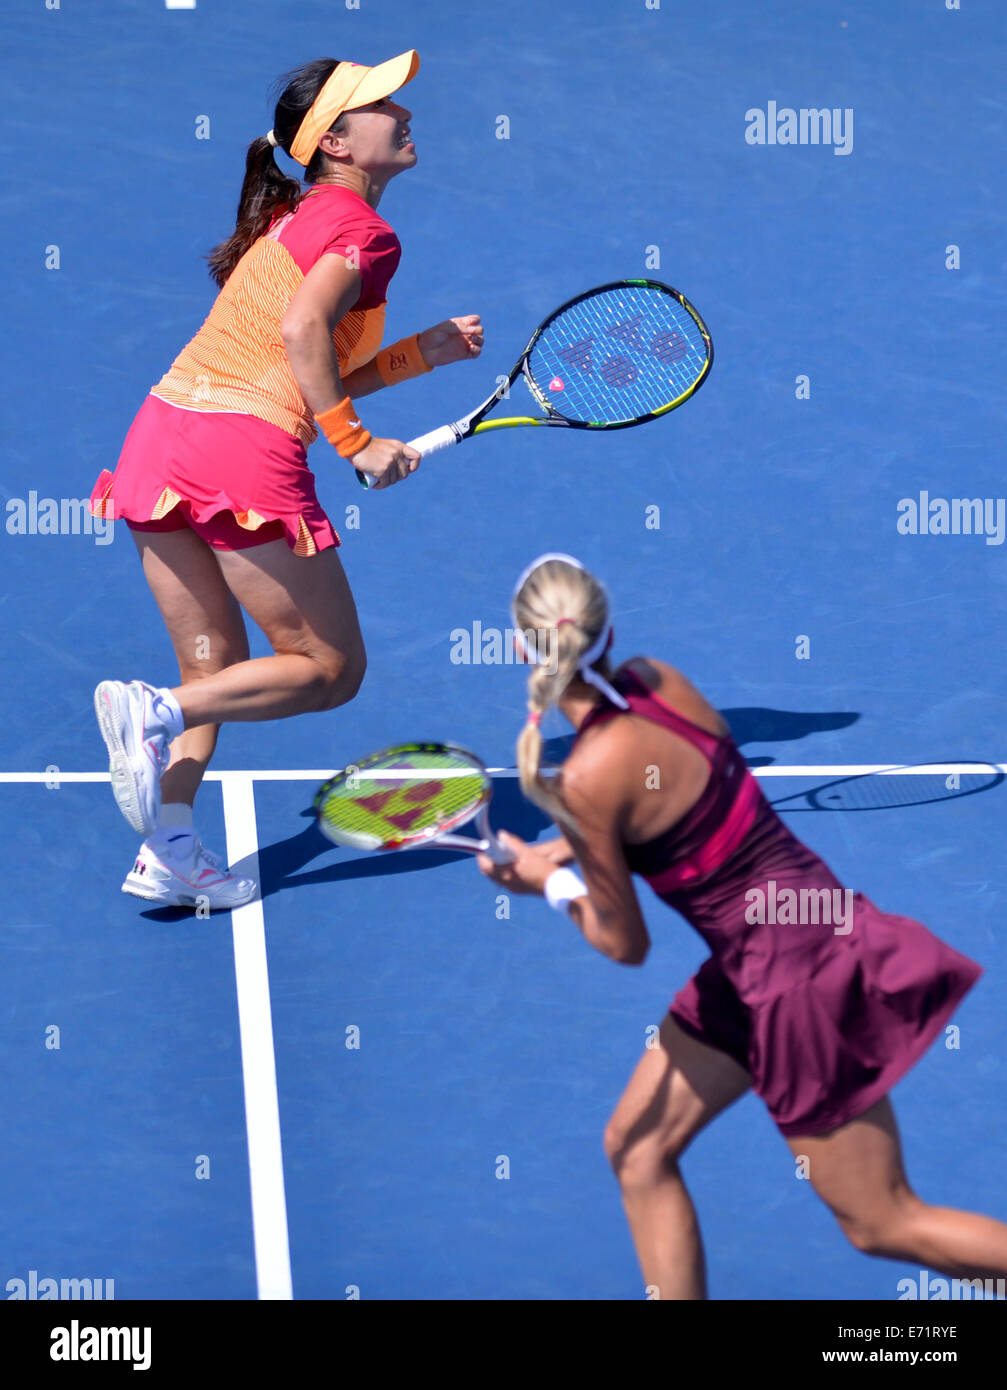 New York, USA. 3rd Sep, 2014. Zheng Jie (L) of China and Andrea Hlavackova of the Czech Republic compete during their women's doubles quarterfinal match against Kimiko Date-Krumm of Japan and Barbora Zahlavova Strcova of the Czech Republic at the 2014 U.S. Open in New York, the United States, Sept. 3, 2014. Date-Krumm and Strcova won 2-1. Credit:  Yin Bogu/Xinhua/Alamy Live News Stock Photo